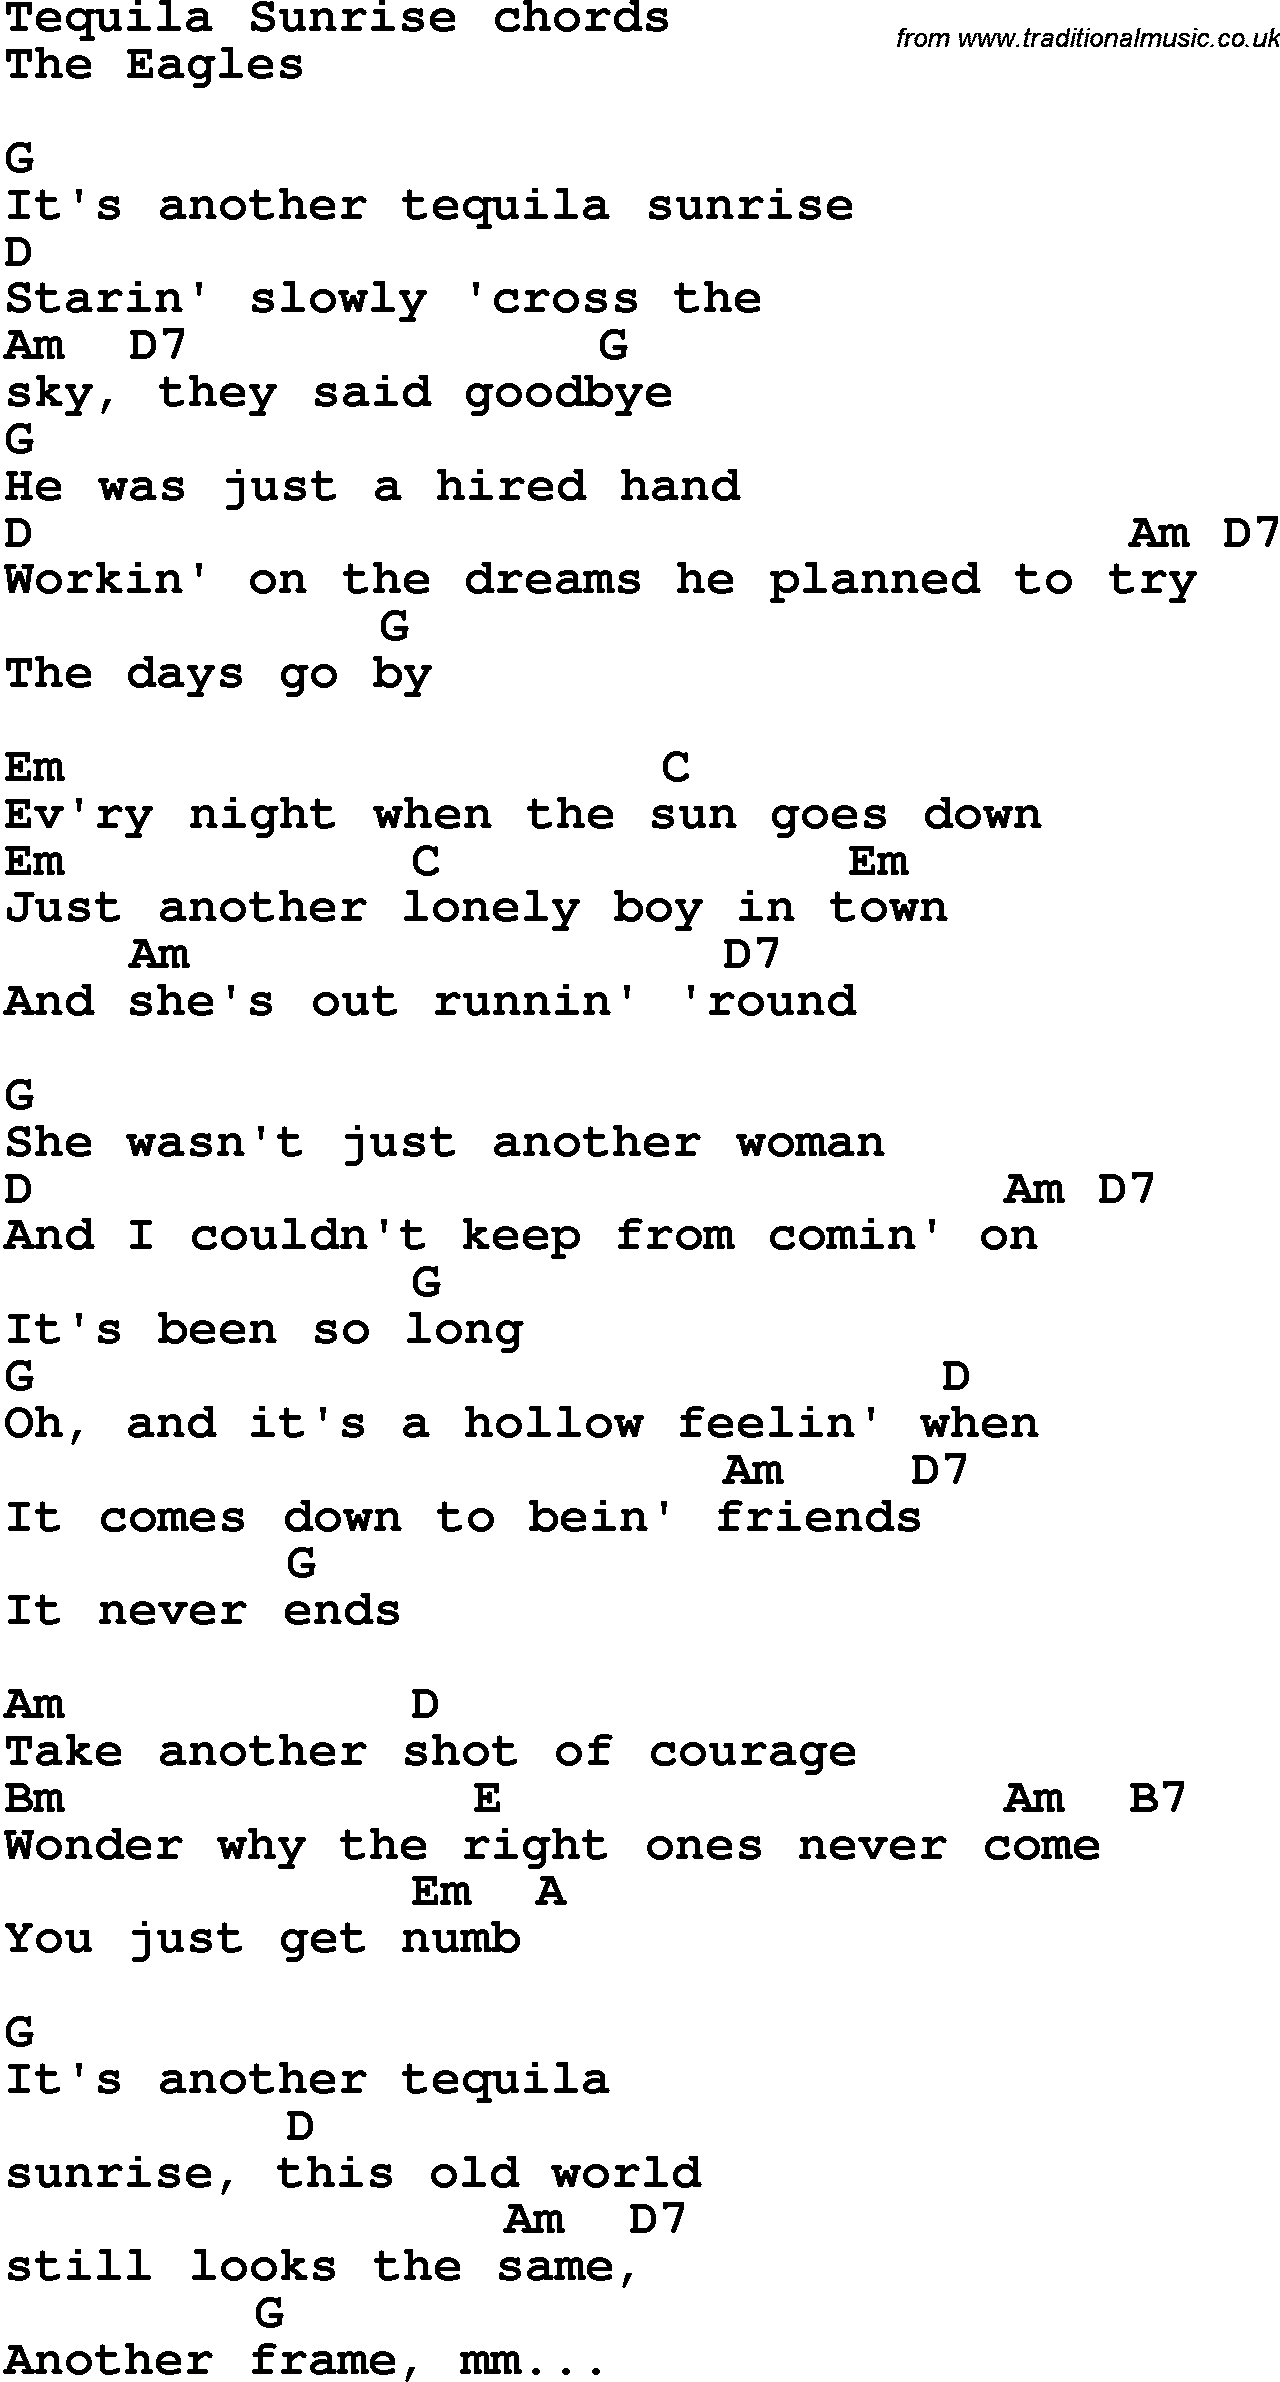 Guitar Chords Songs Song Lyrics With Guitar Chords For Tequila Sunrise The Eagles